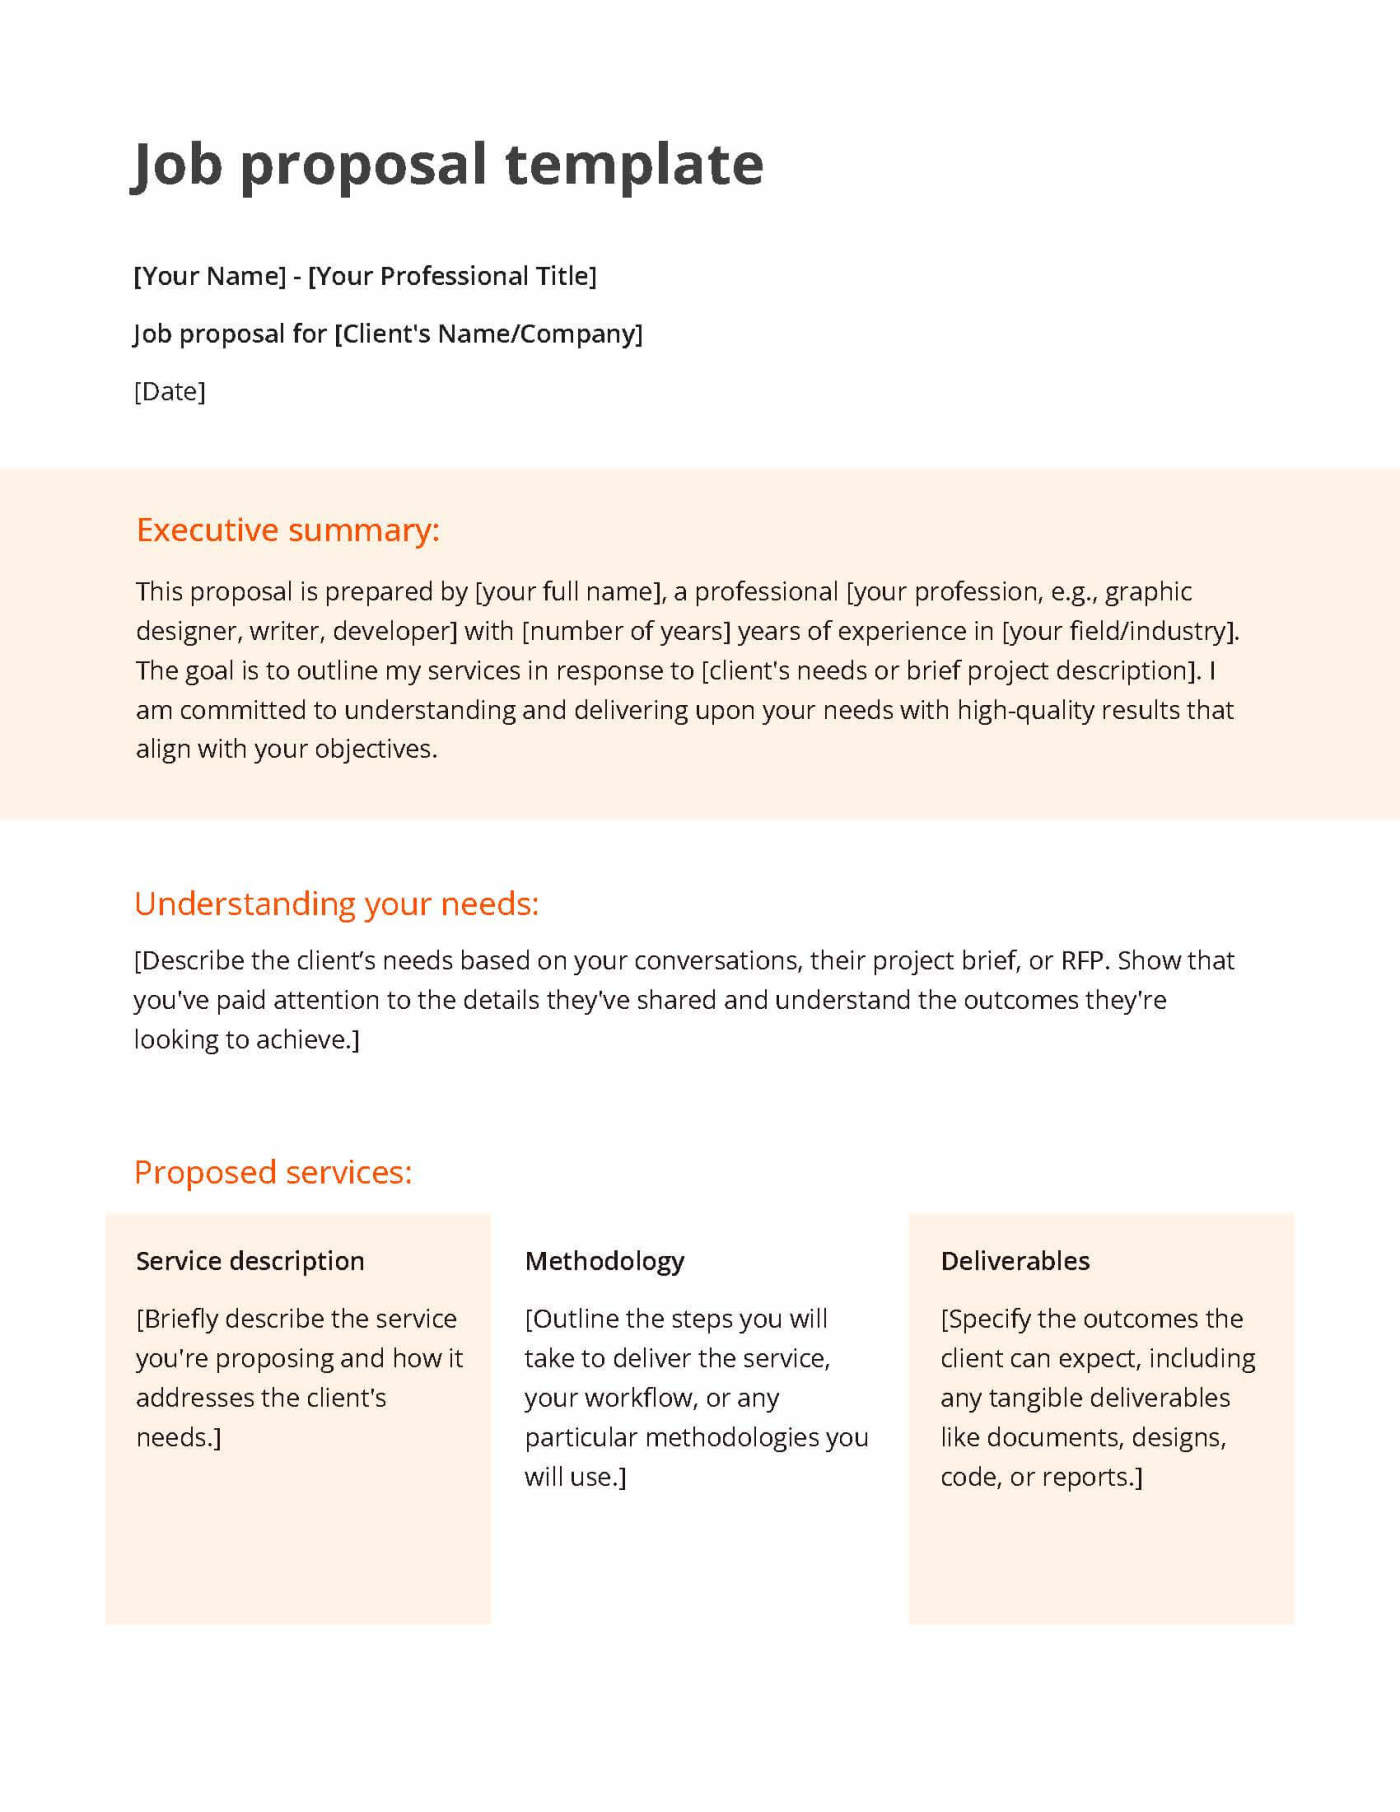 Orange and white job proposal template including an executive summary, understanding your needs and proposed services